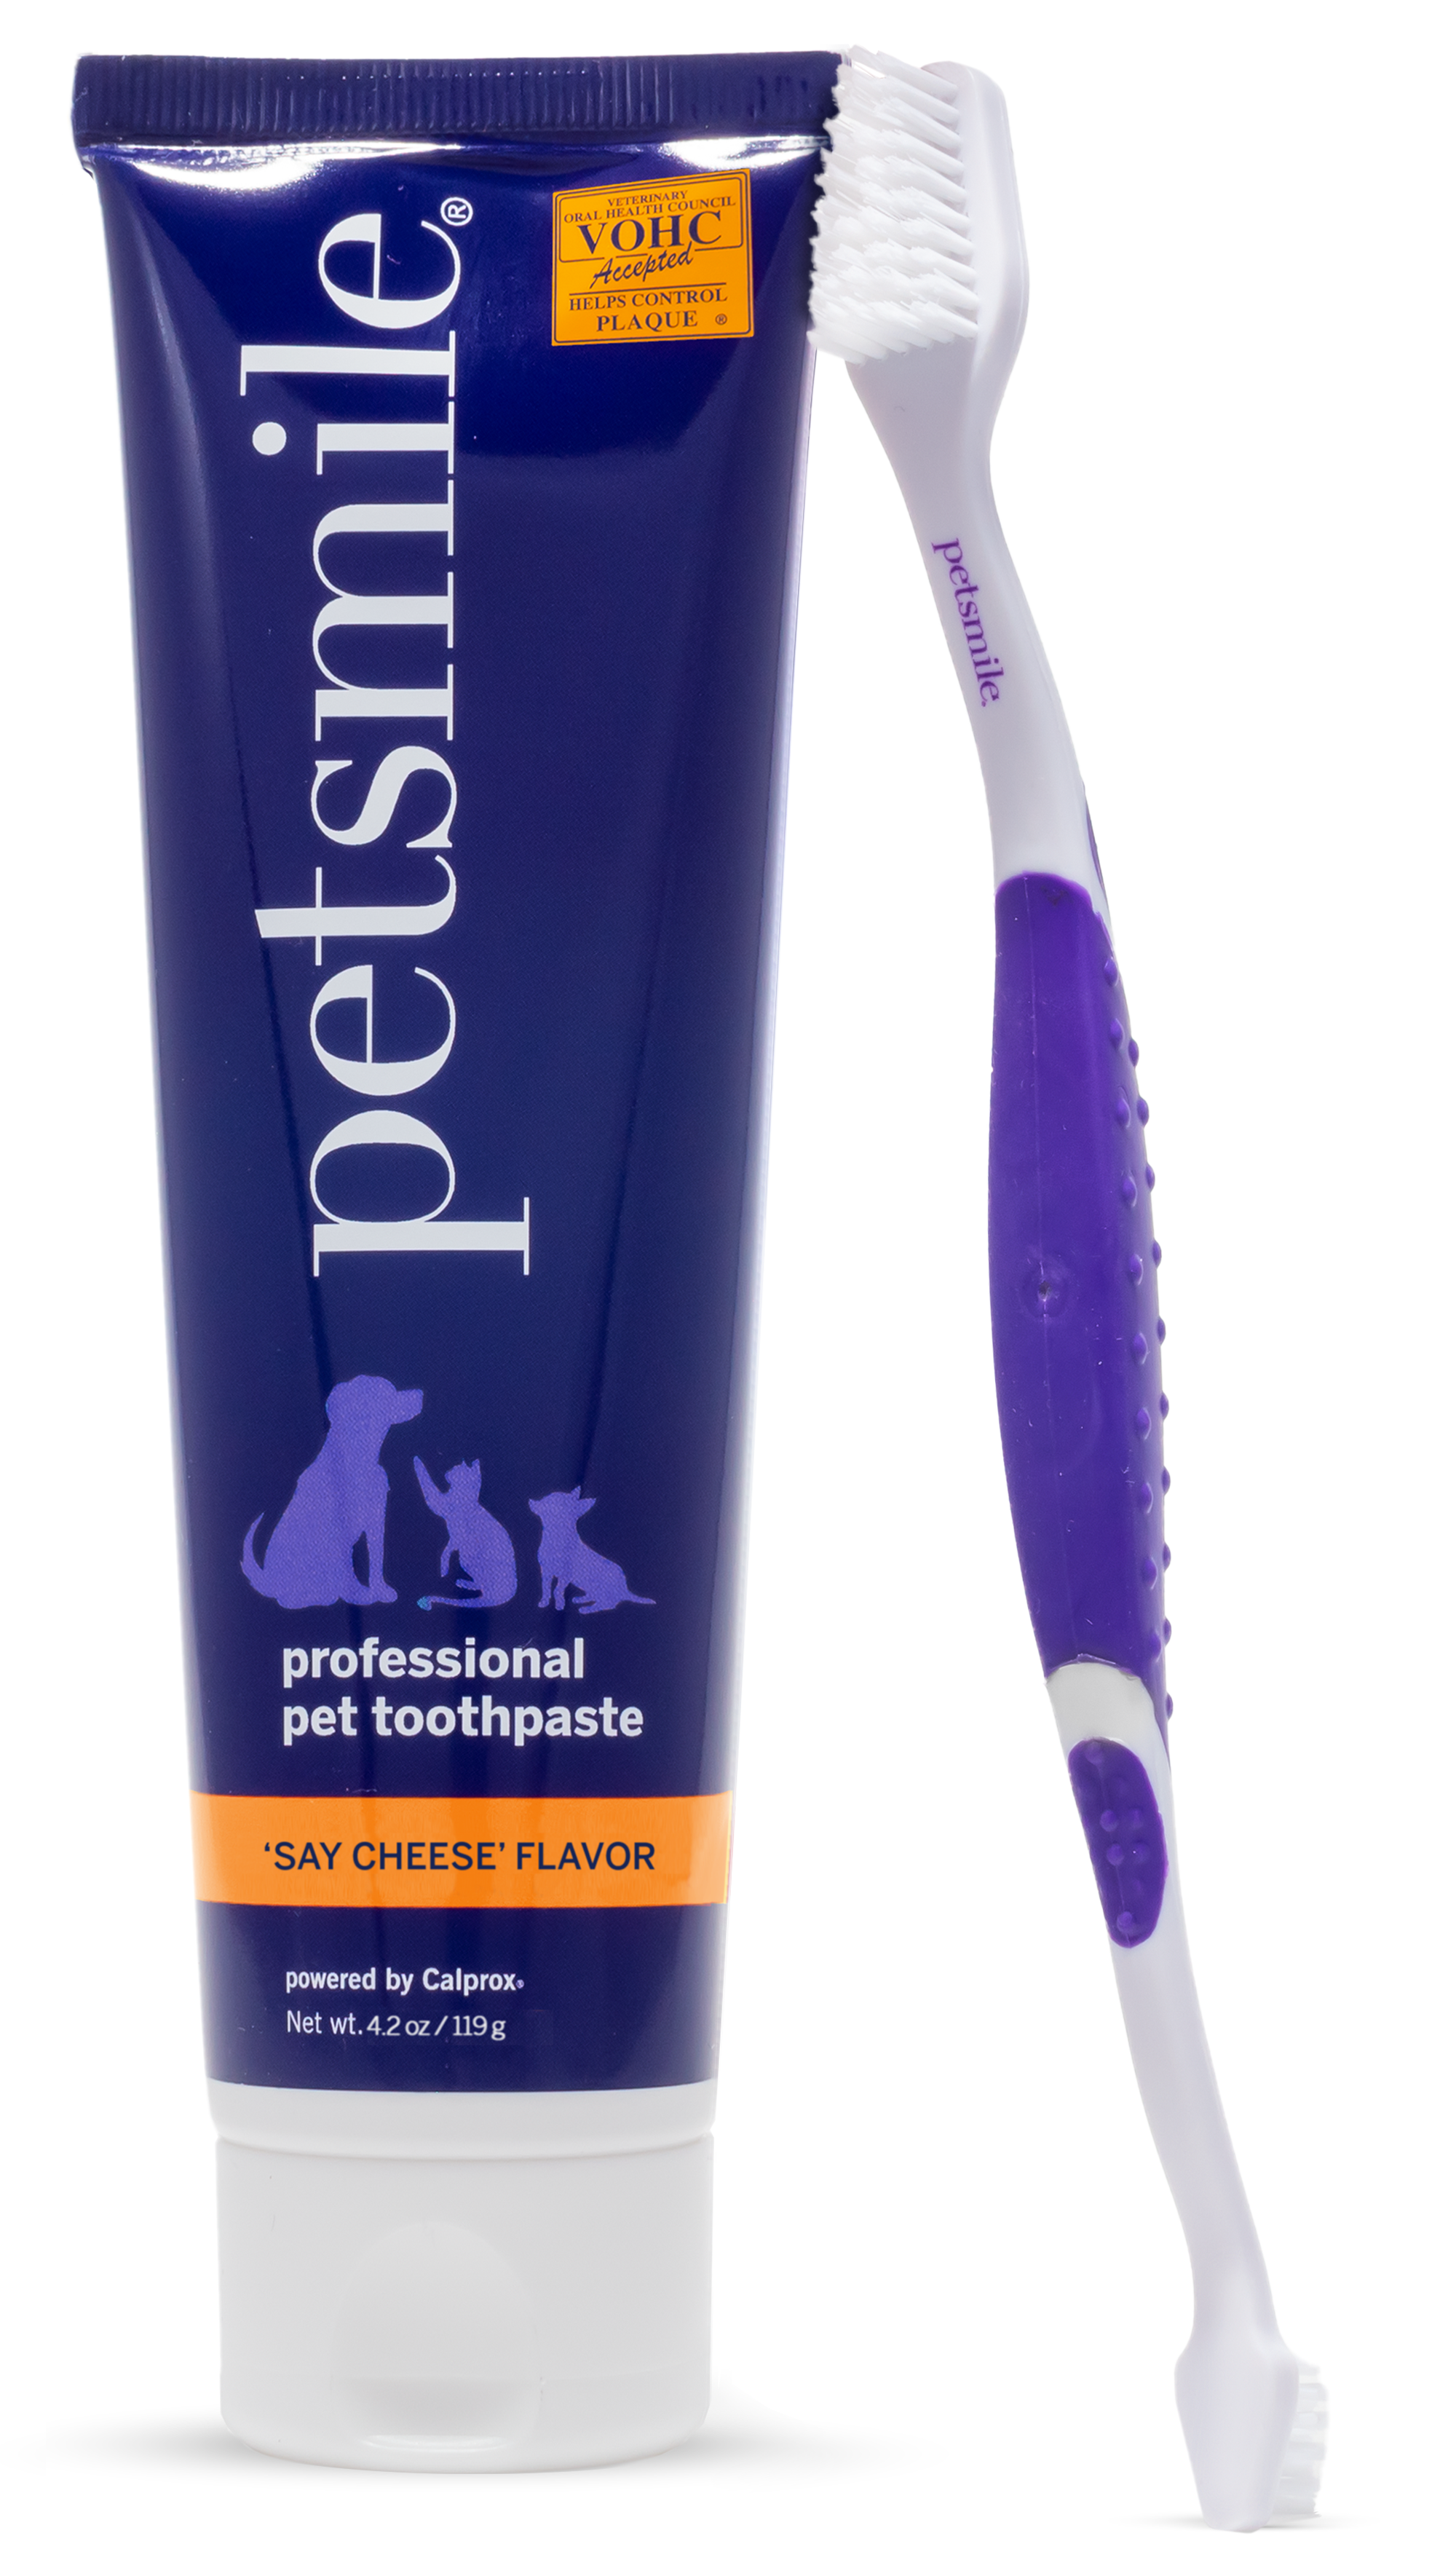 Complete dental care for pets , Purple petsmile brush and toothpaste kit , 45-degree angle brush and toothpaste , VOHC approved toothpaste in Say Cheese flavor , petsmile dental care for professional results